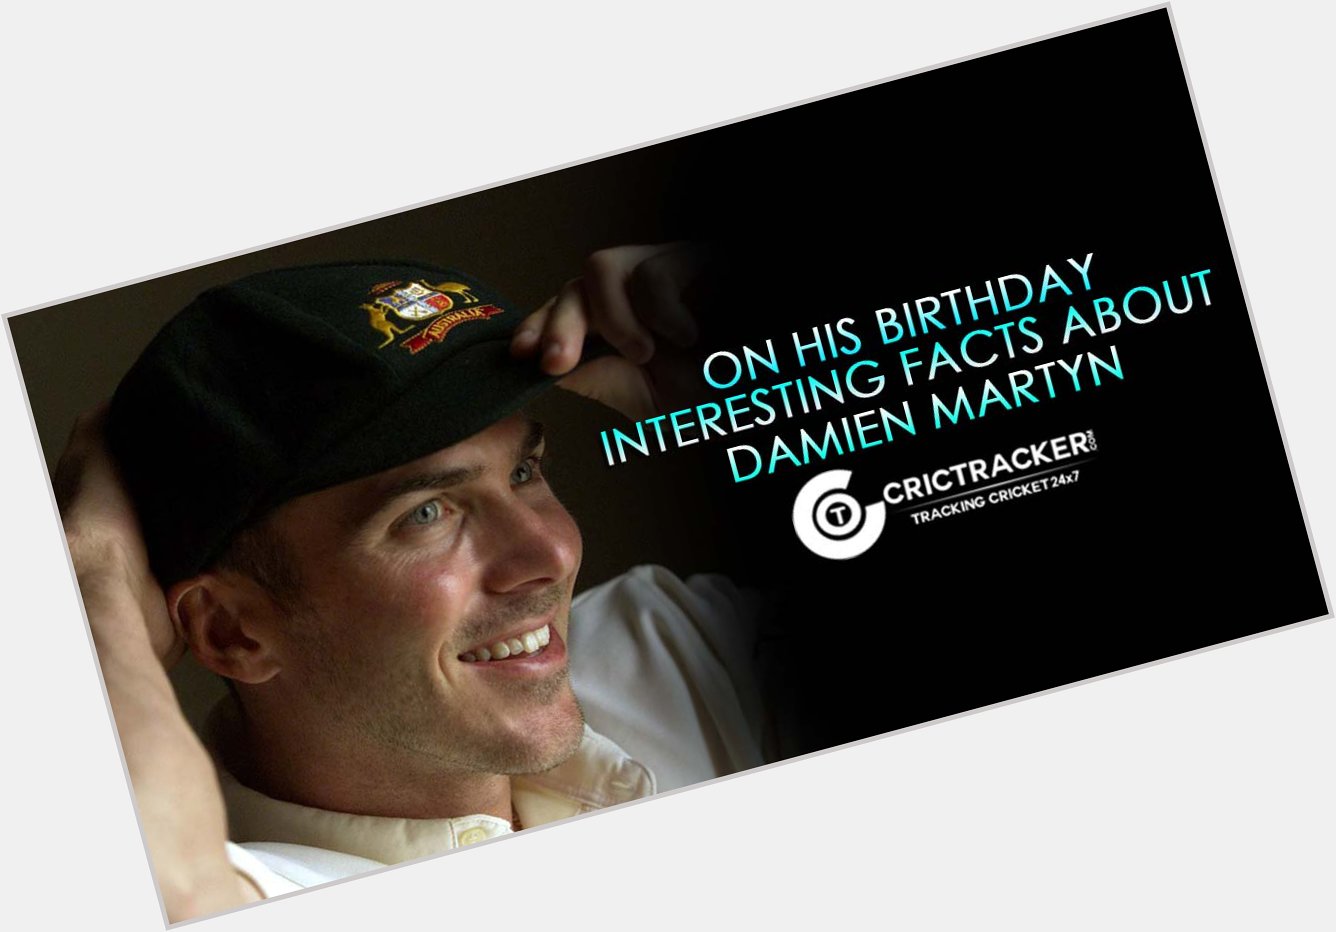 Happy Birthday \"Damien Martyn\". He turns 44 today

Here are the Facts about Damien Martyn:  